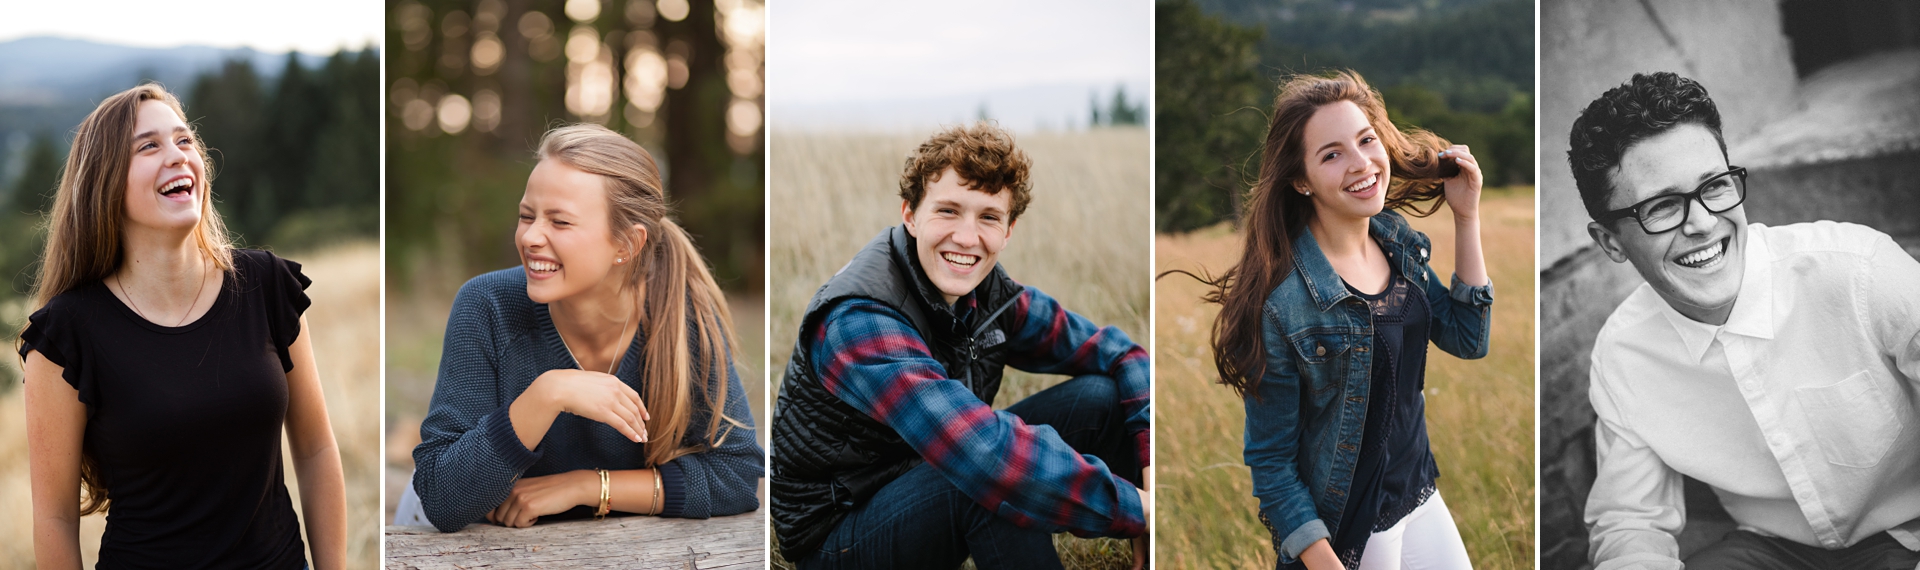 senior portrait guide by thistledown photography in corvallis oregon